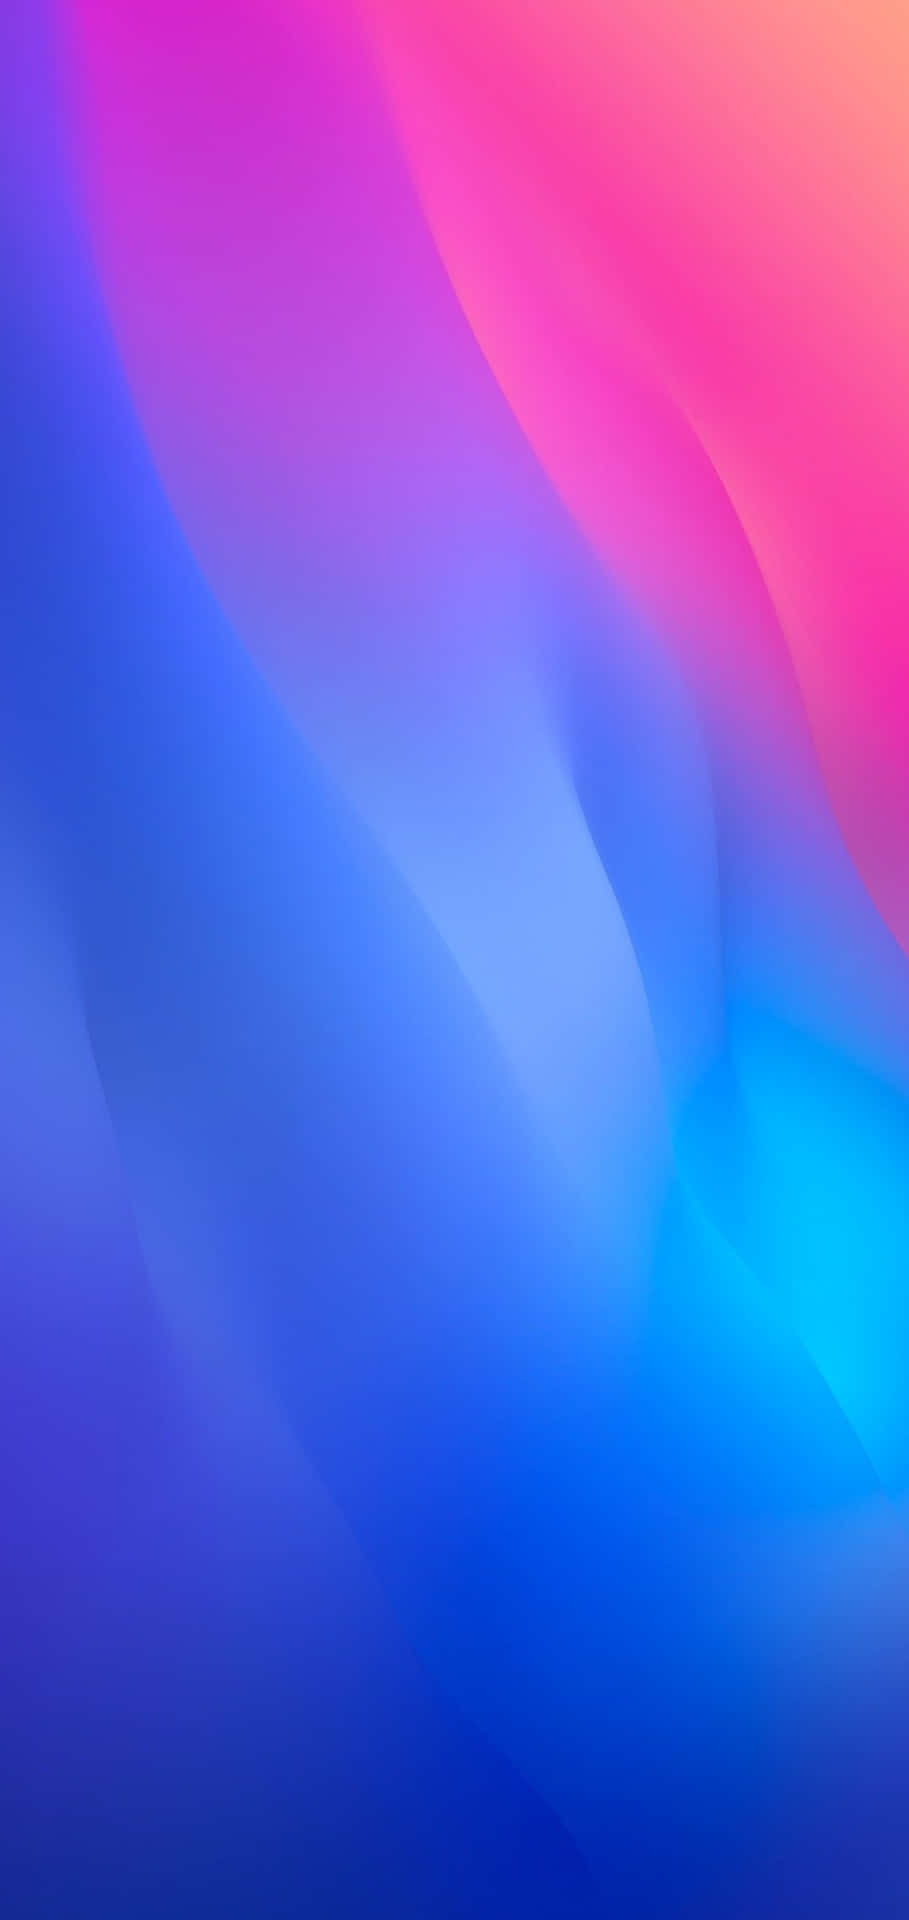 Minimalist Design Meets Modern Simplicity with the Blue iPhone Wallpaper